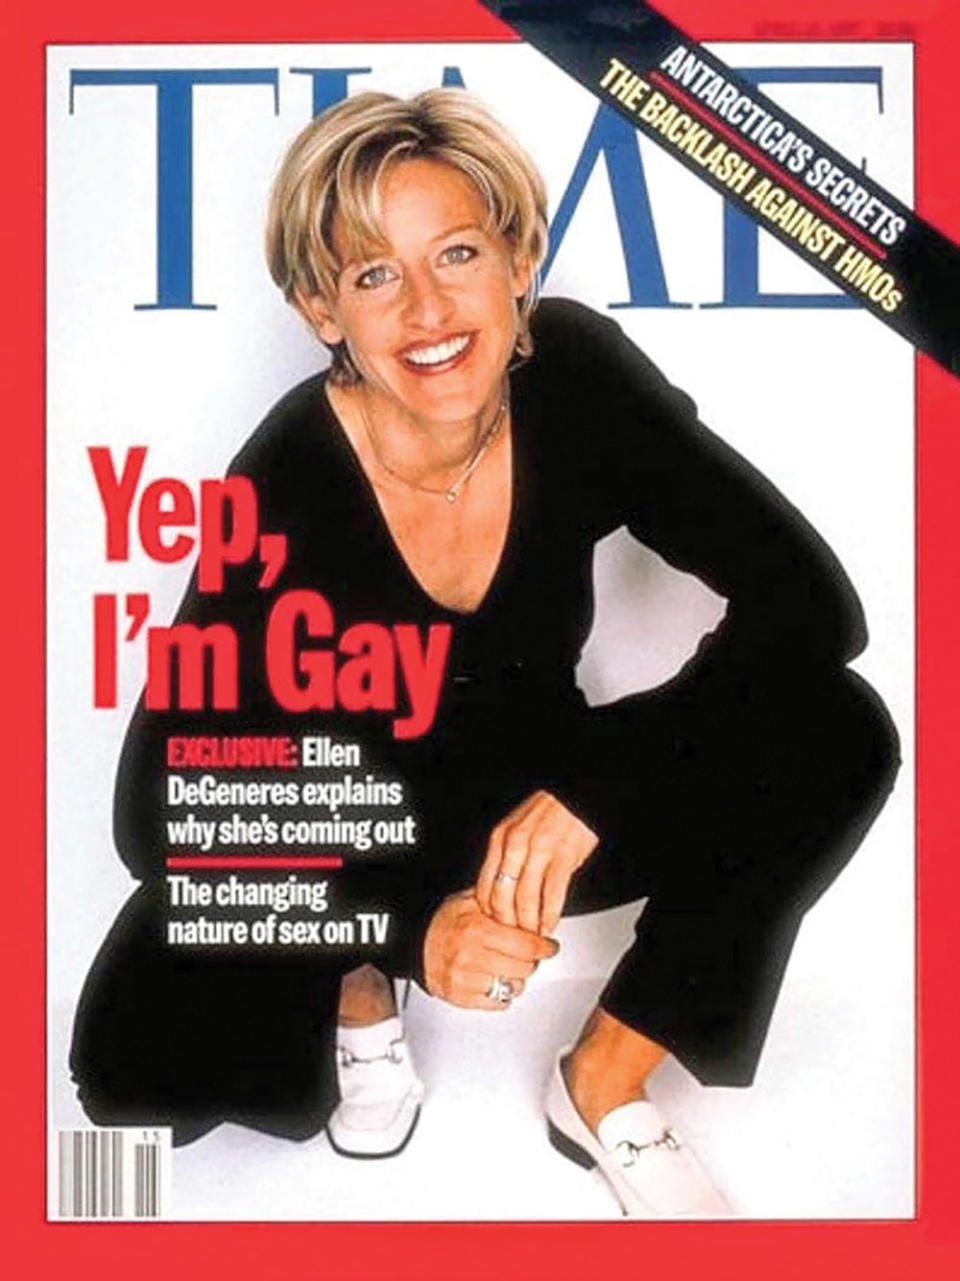 Ellen DeGeneres’ cover of Time magazine on April 14, 1997, in which she came out. Ellen is an absolute hero, says Halls.